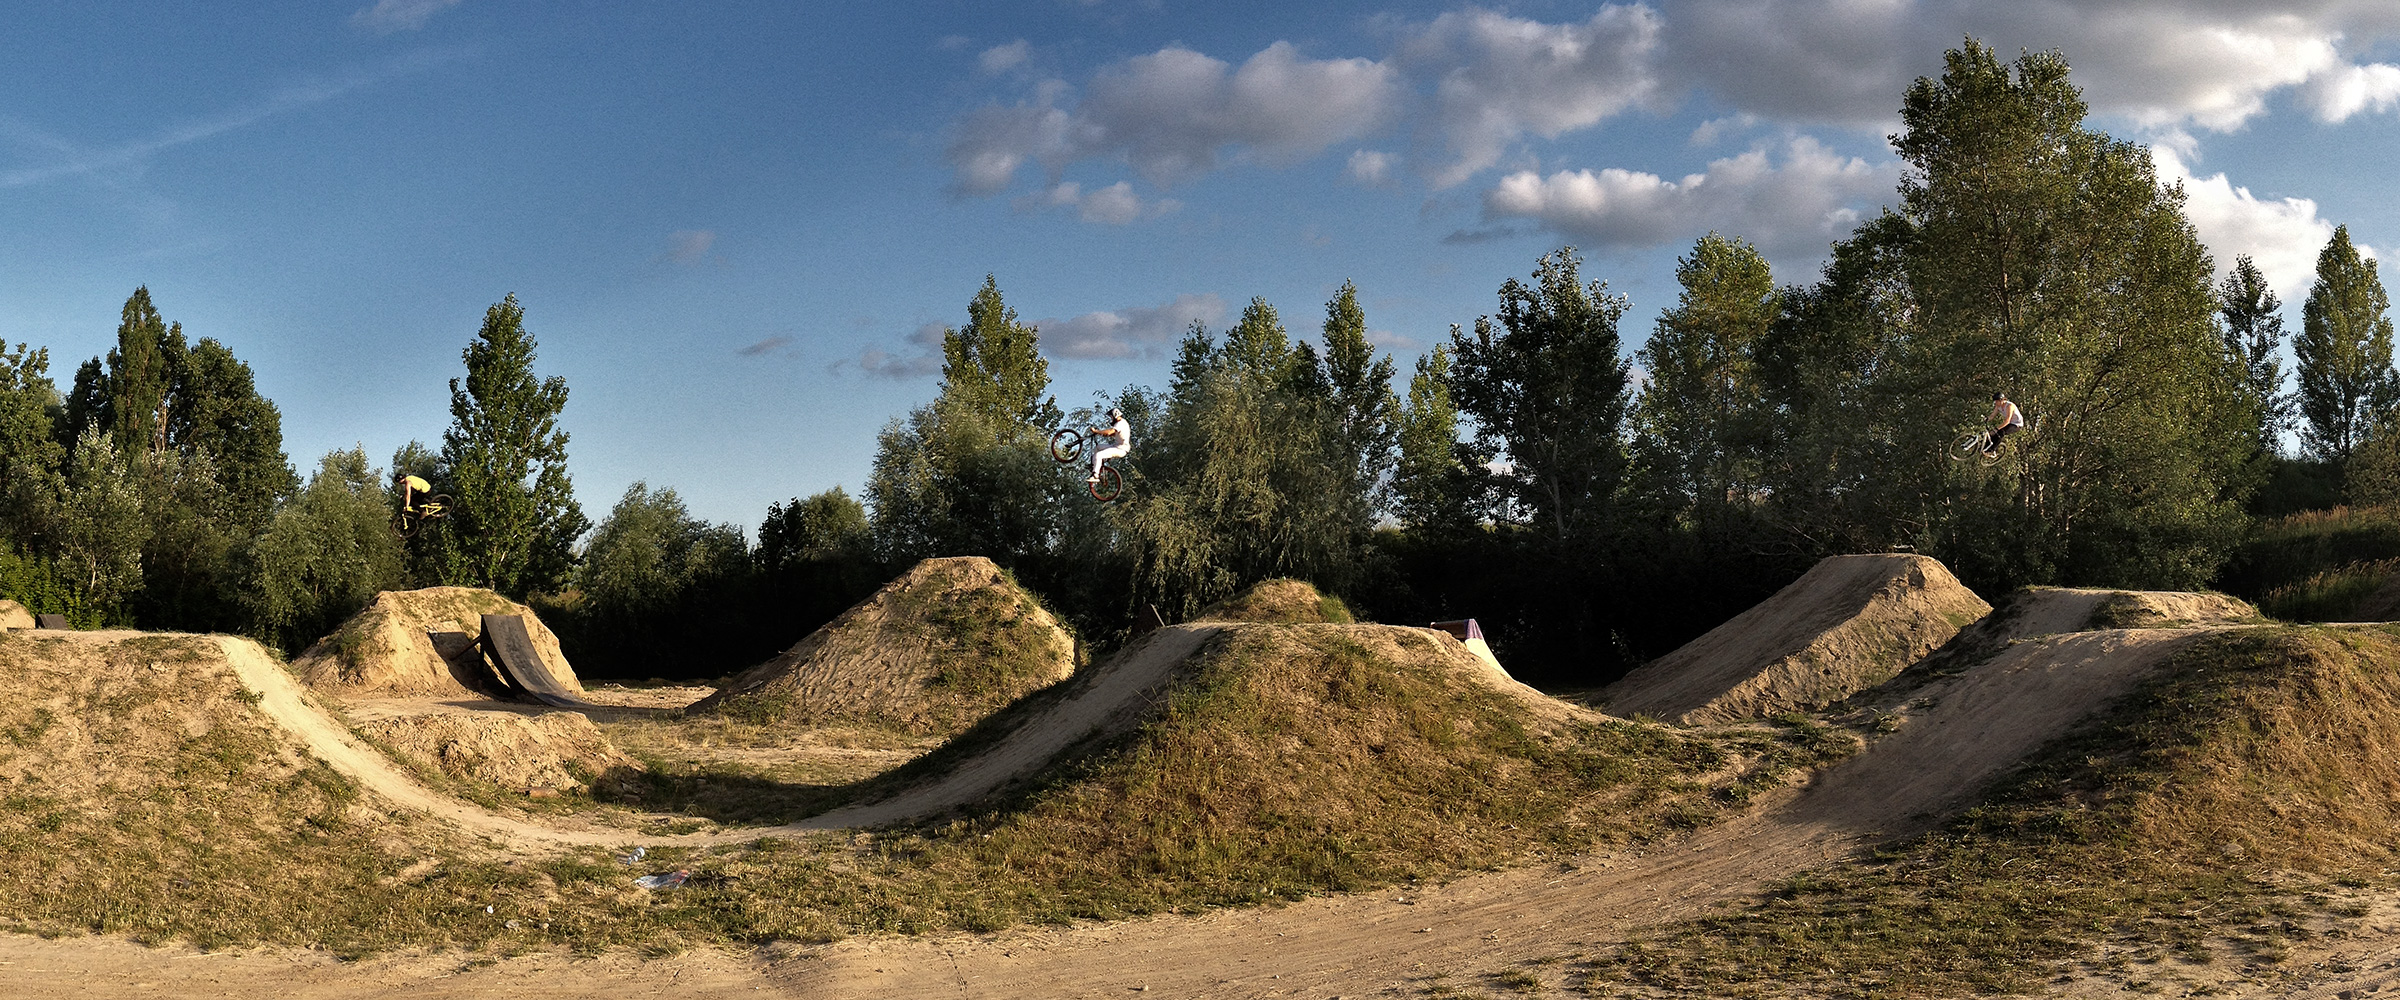 PANORAMA DIARY | Iphoneography blog | Bike jumpers